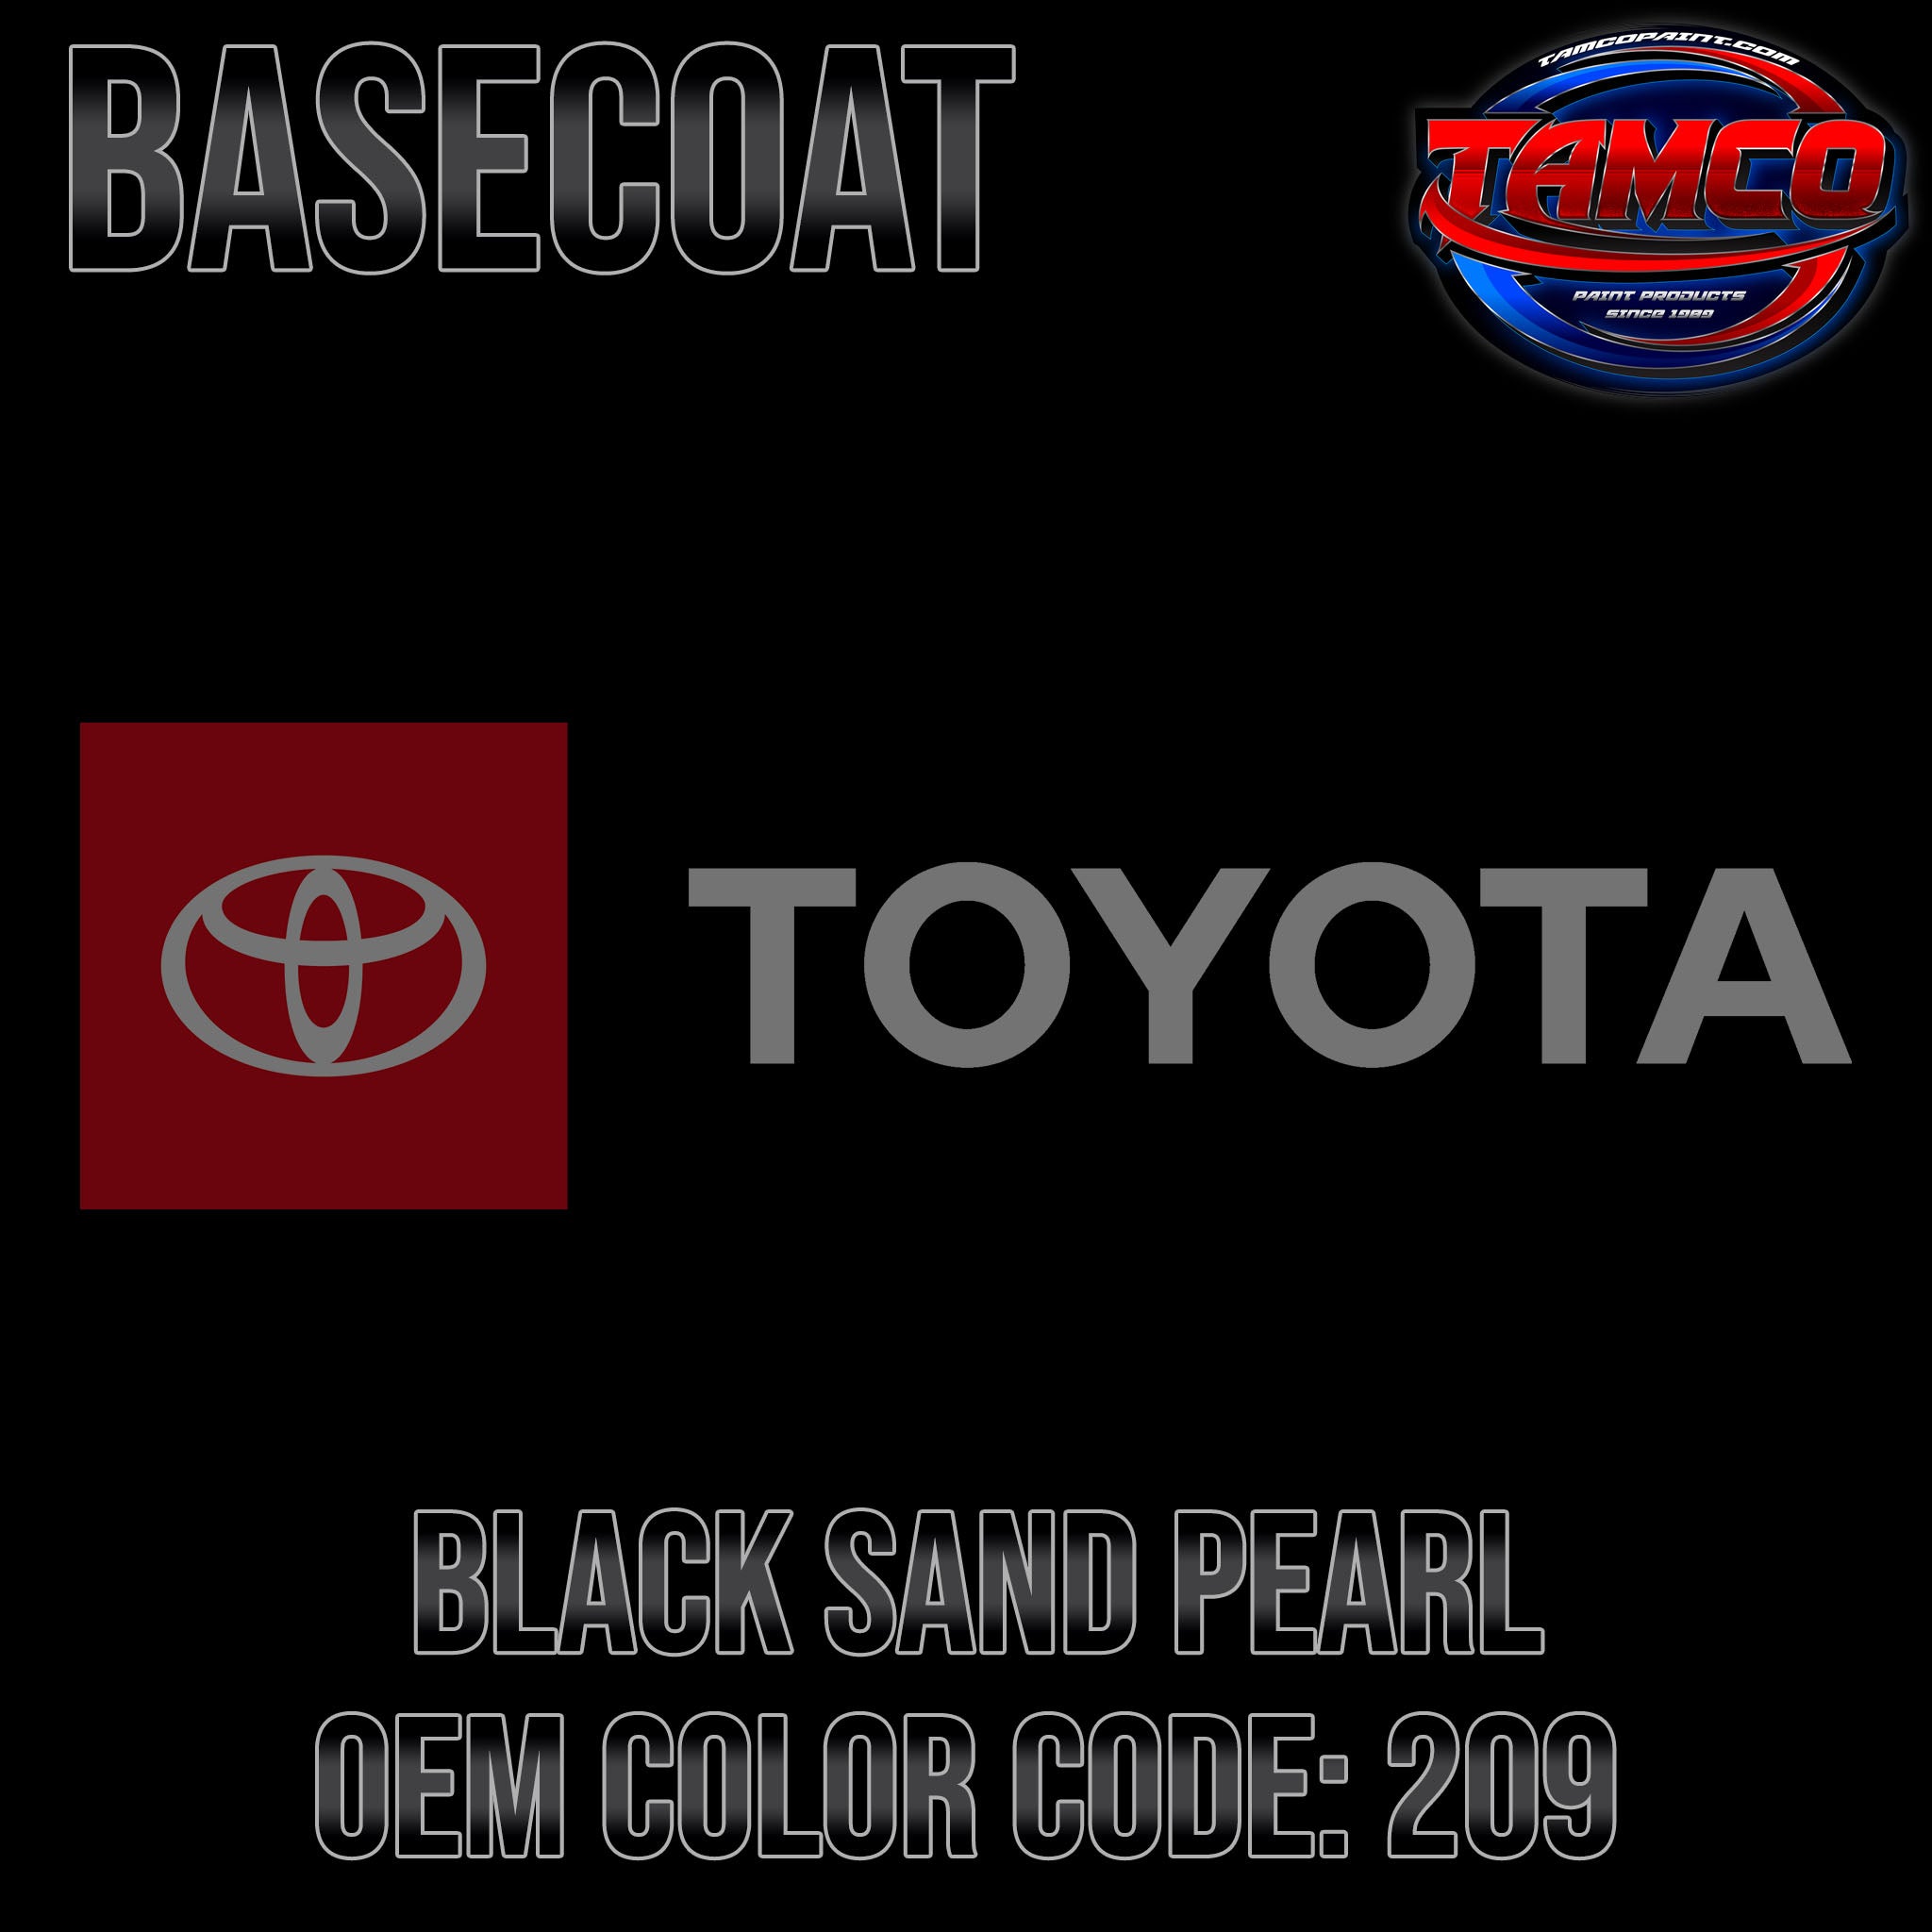 Black Gold Pearl Basecoat Automotive Paint and Kit Options